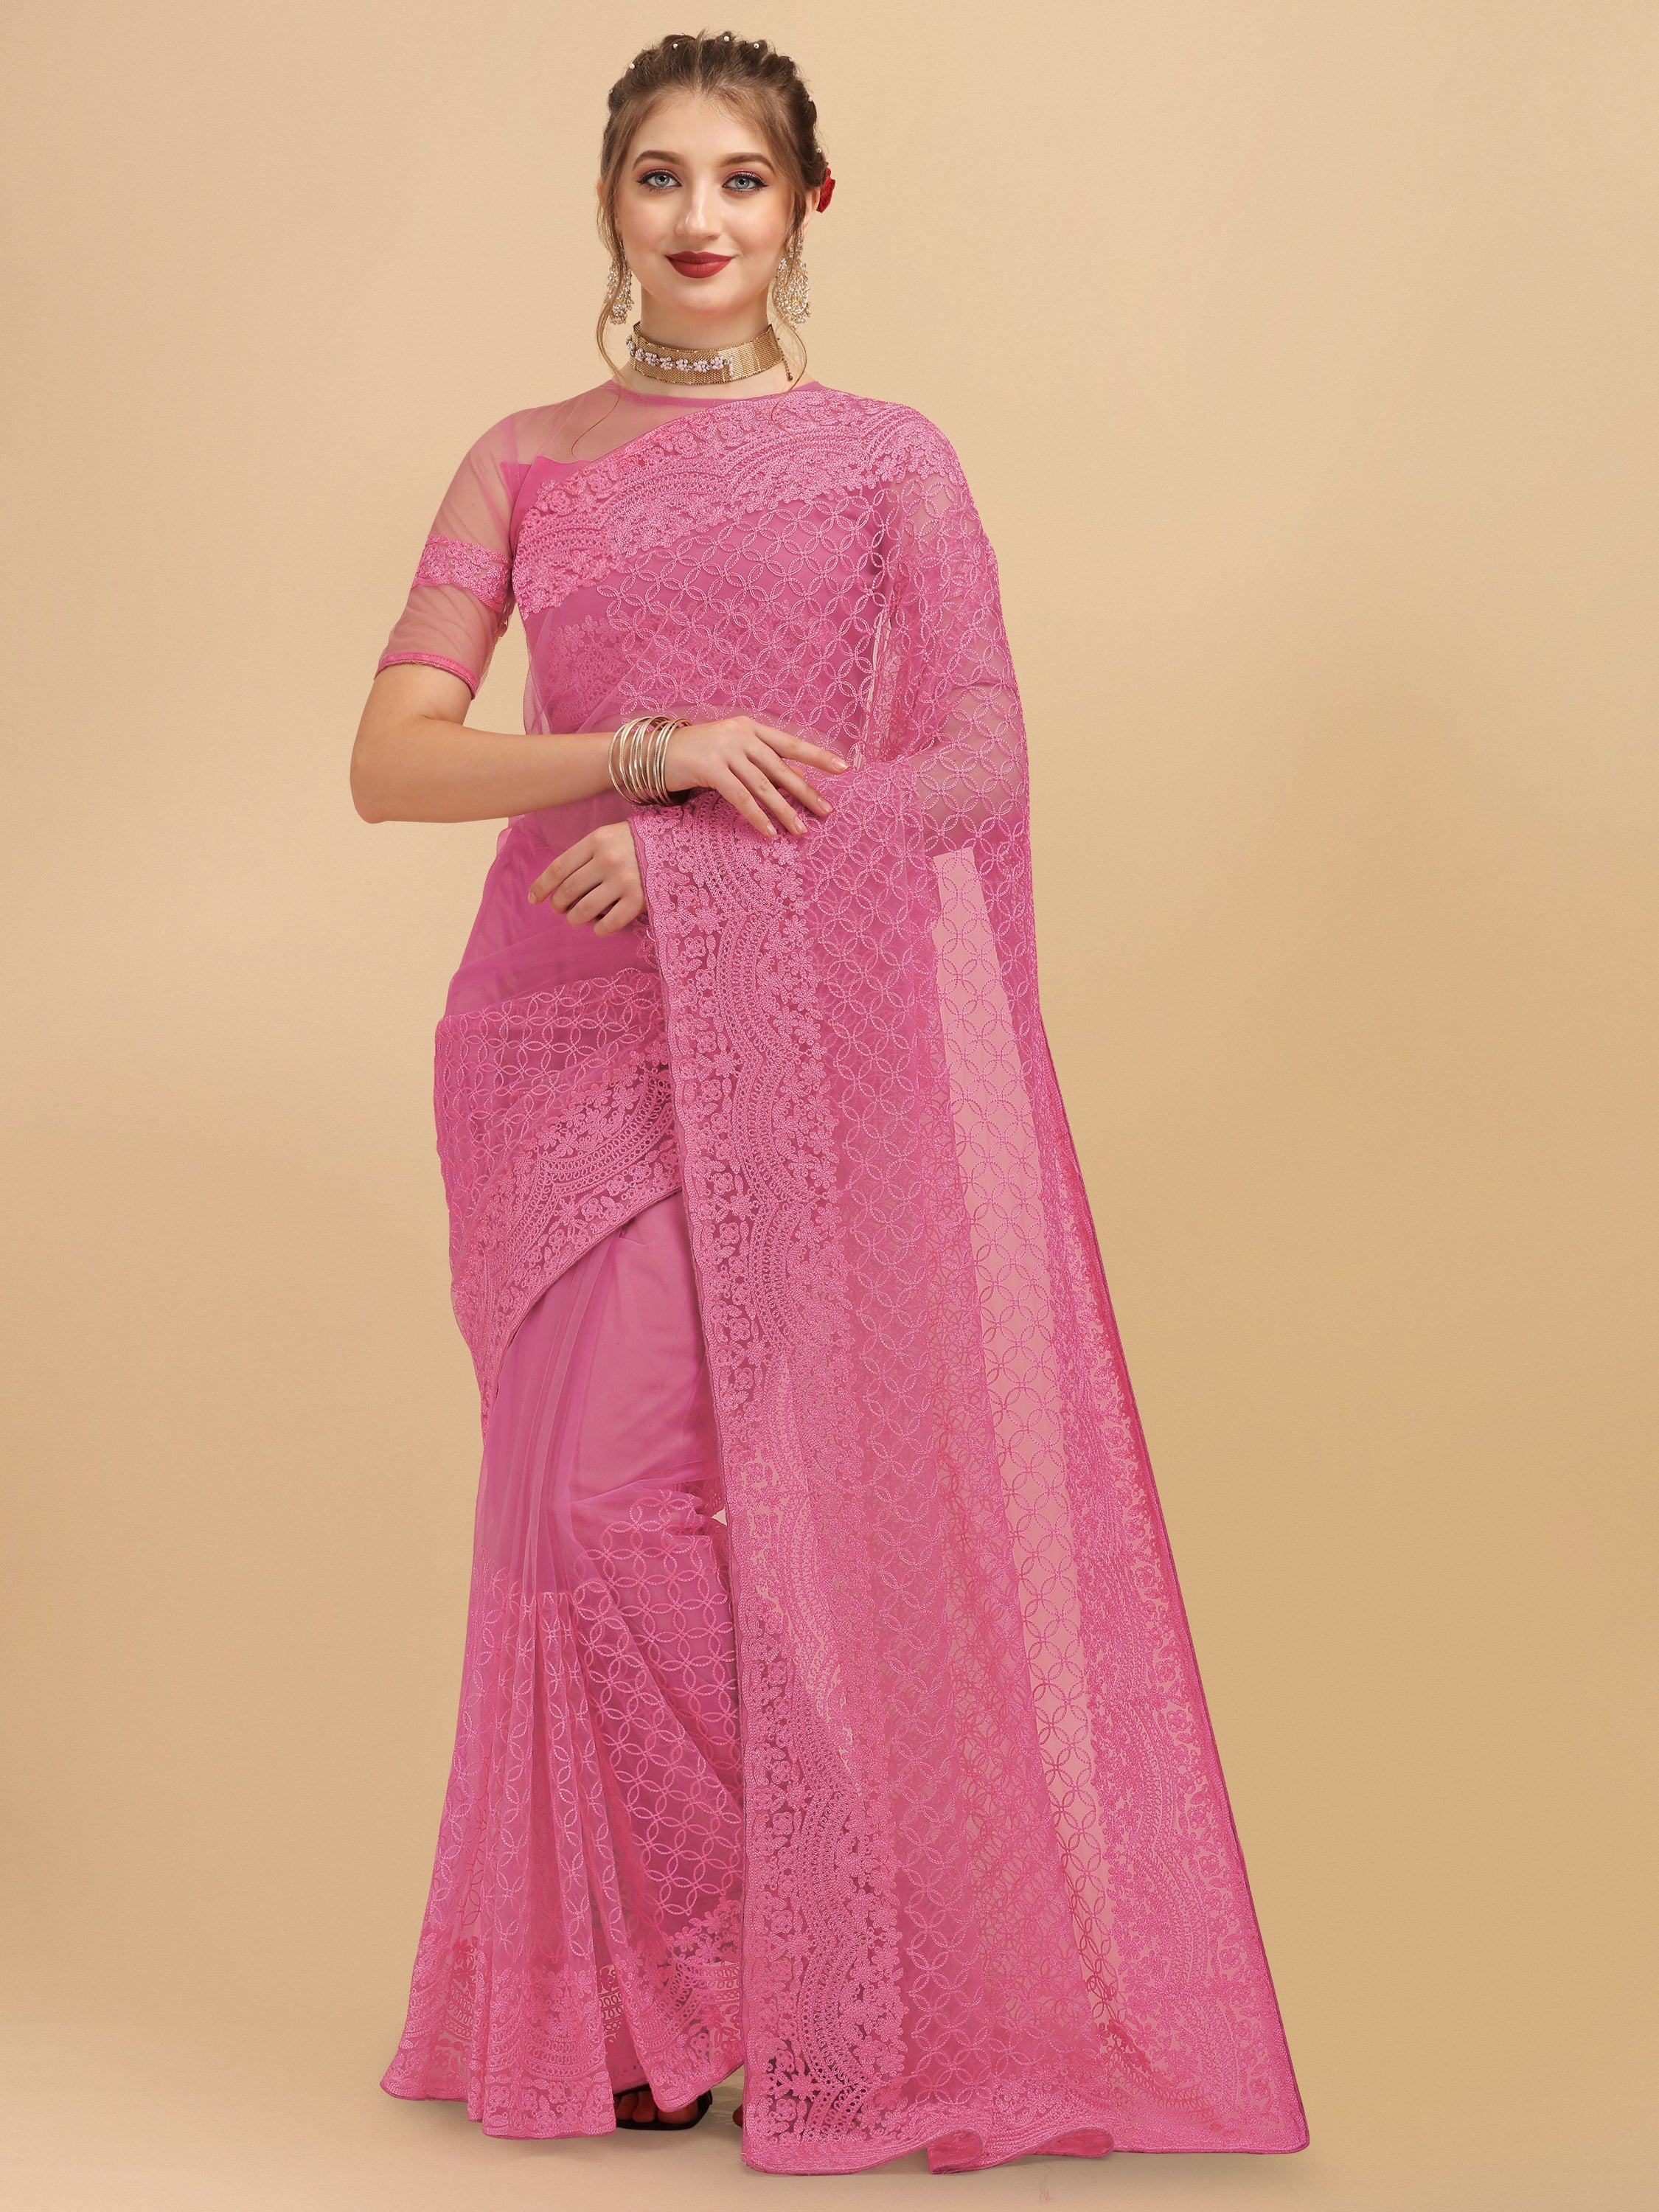 Women's Embroidery Paty Wear Contemporary Net Saree With Blouse Piece (Pink) - NIMIDHYA